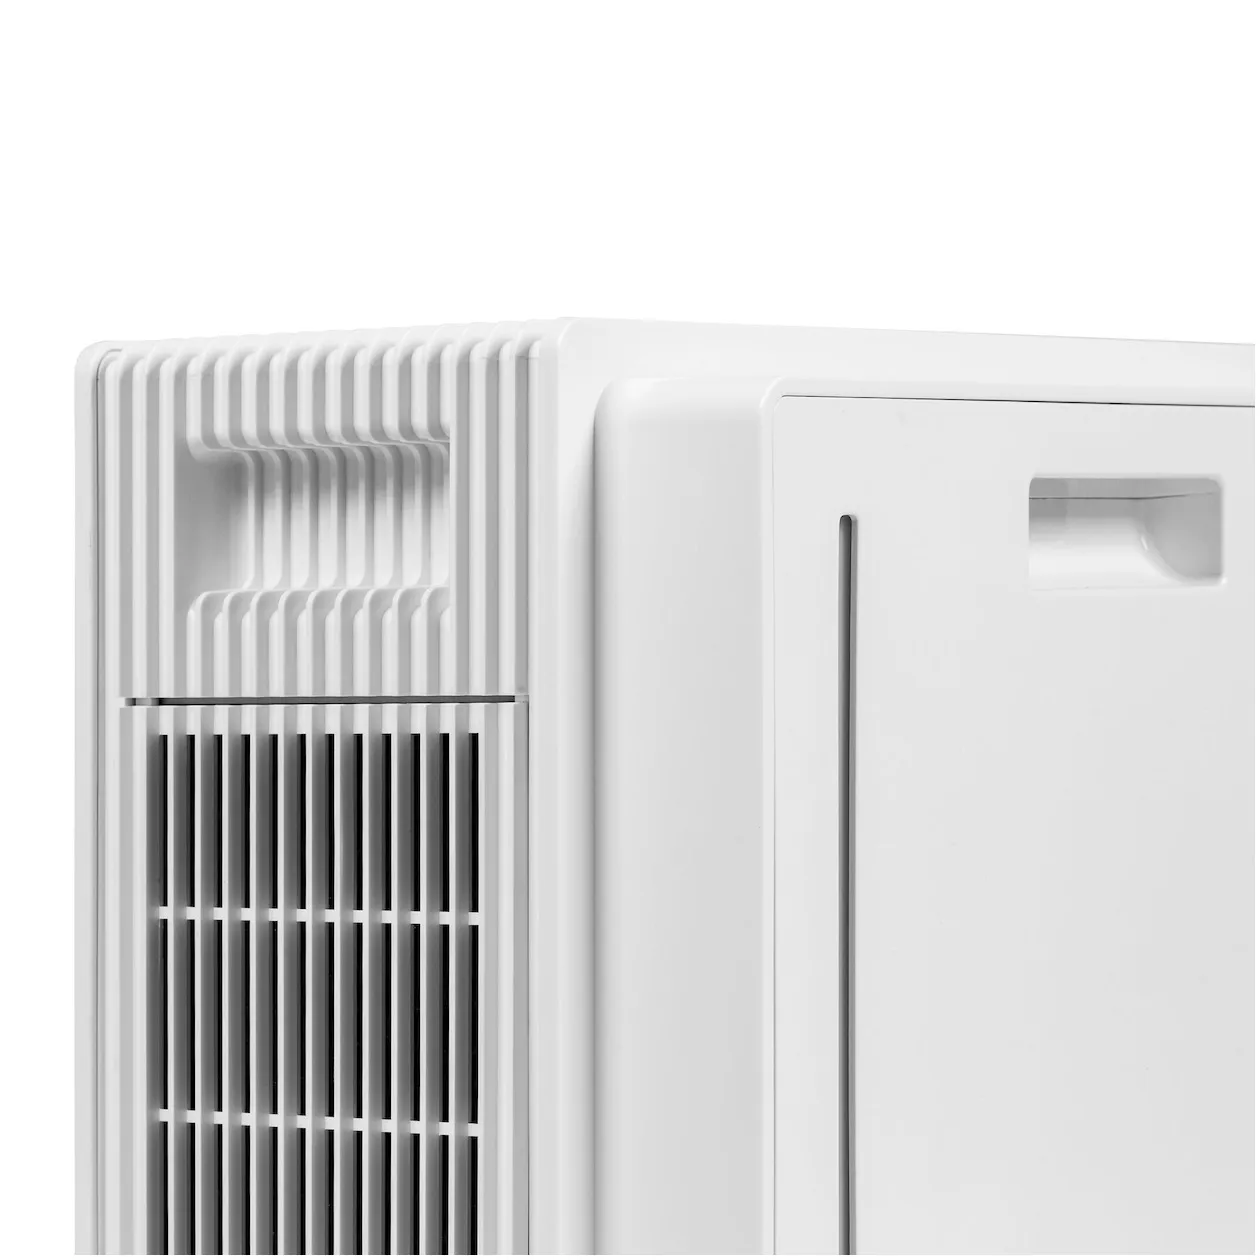 Duux Motion Air Washer Wit